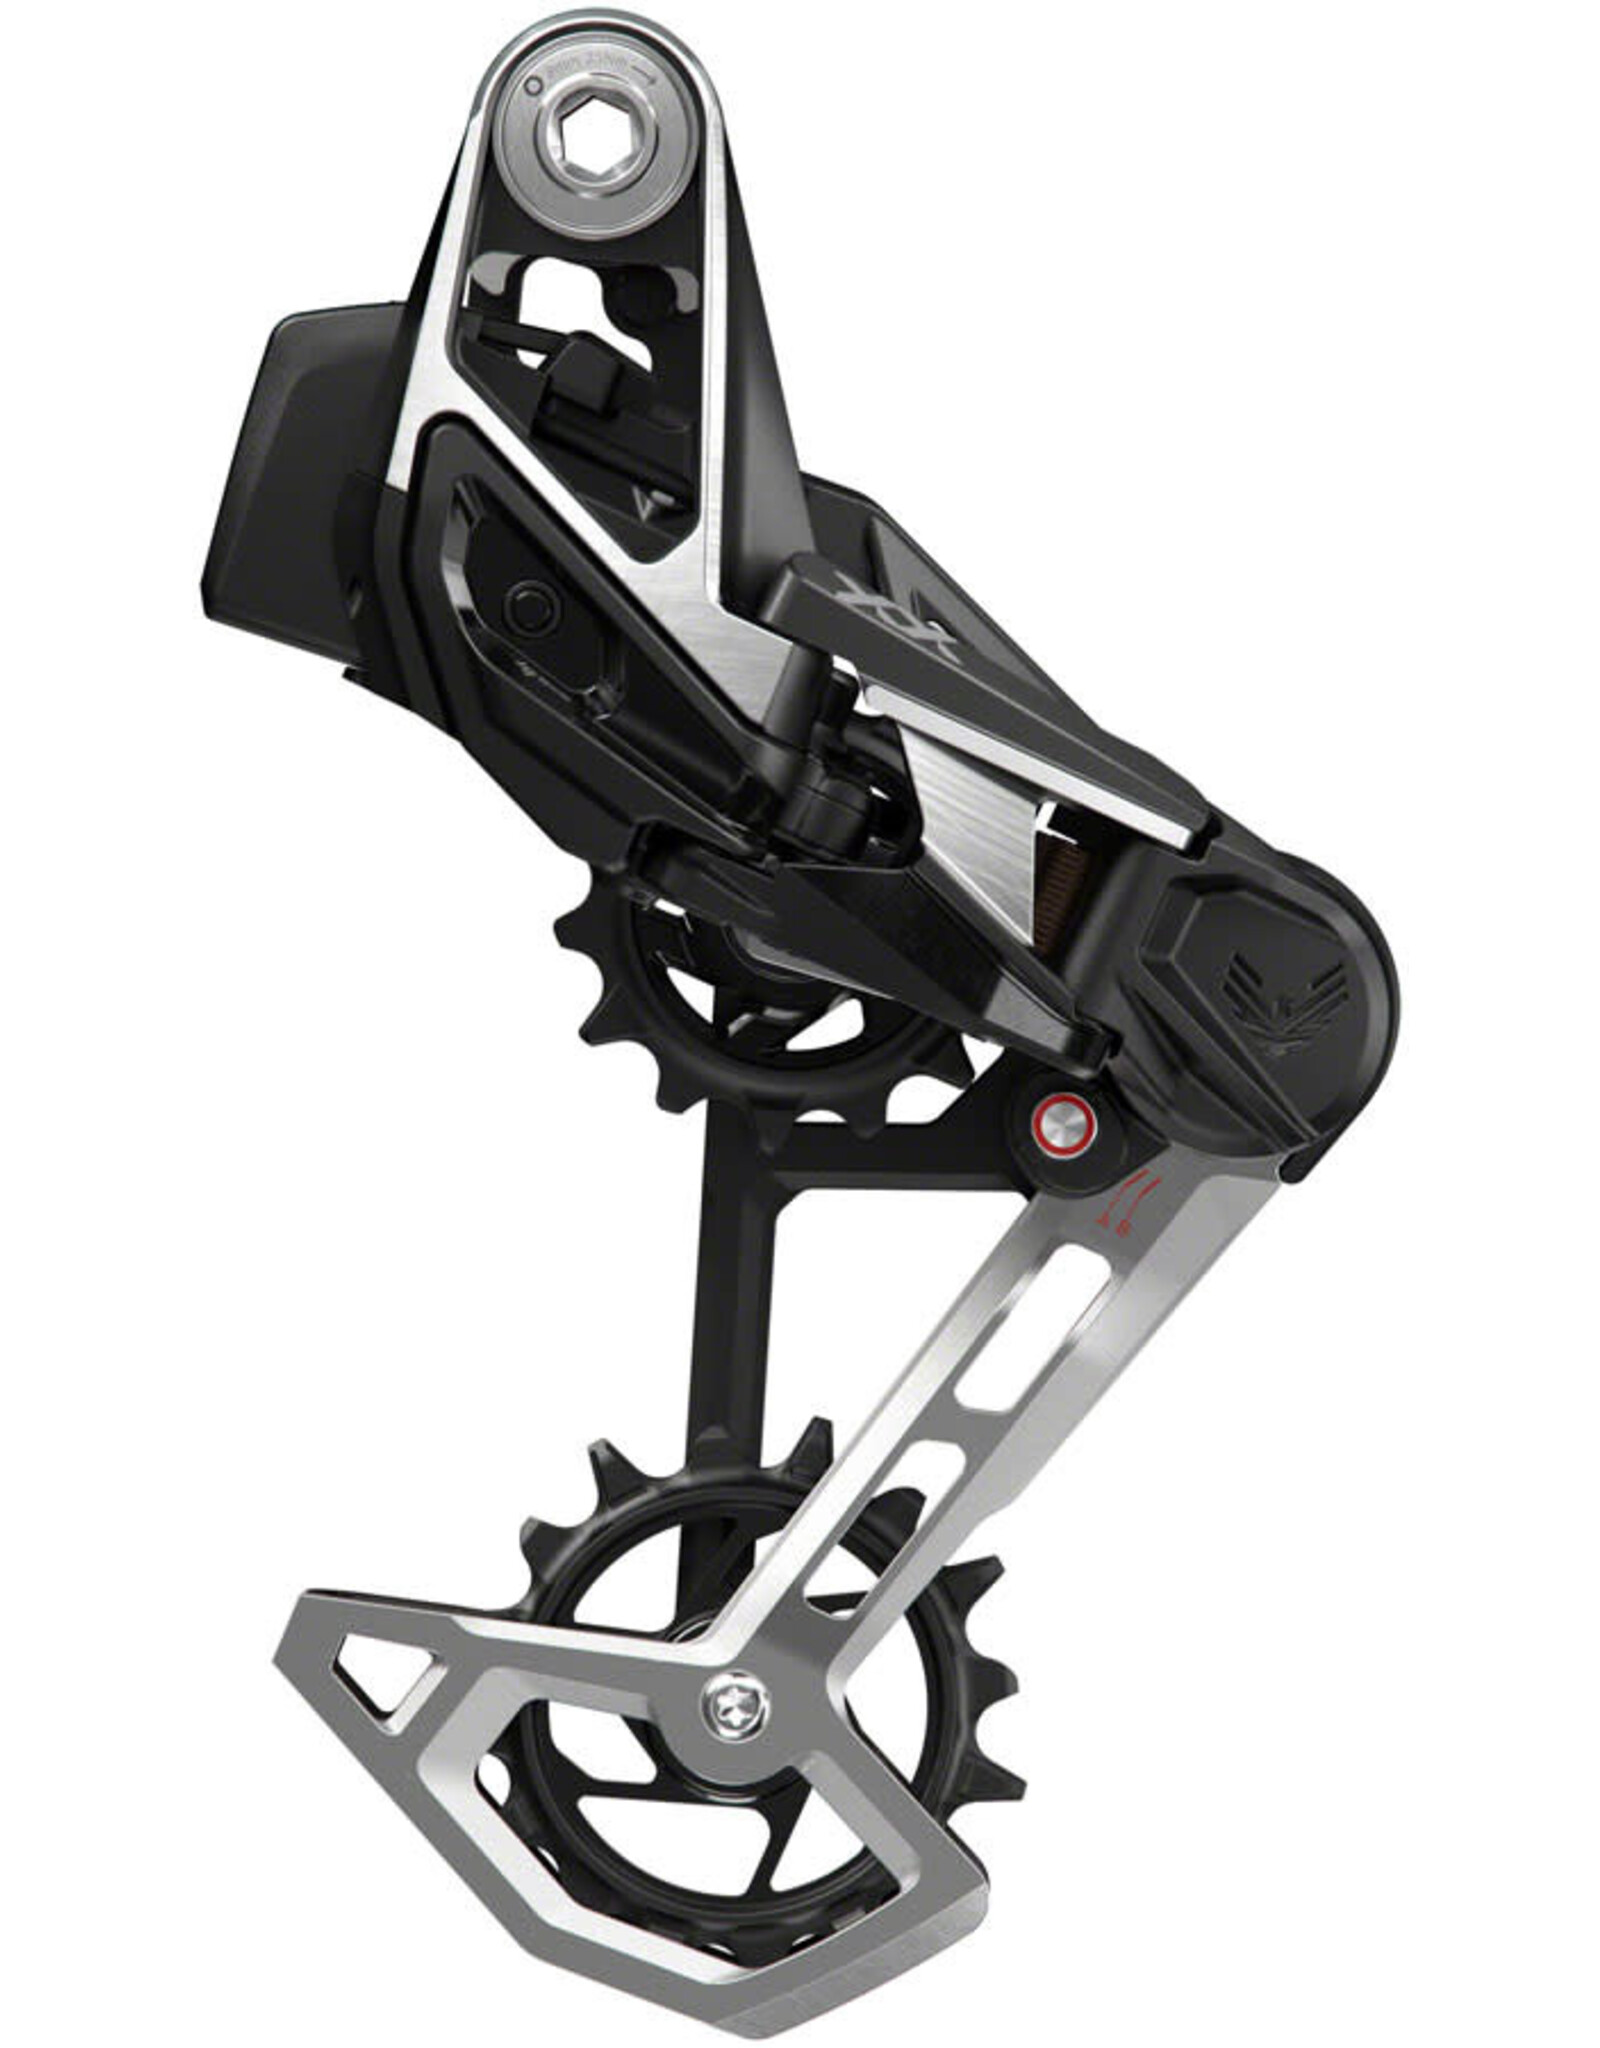 SRAM SRAM XX Eagle T-Type AXS Rear Derailleur - 12-Speed, 52t Max, (Battery Not Included), Wheel Axle Mount, Aluminum Cage, Black/Silver